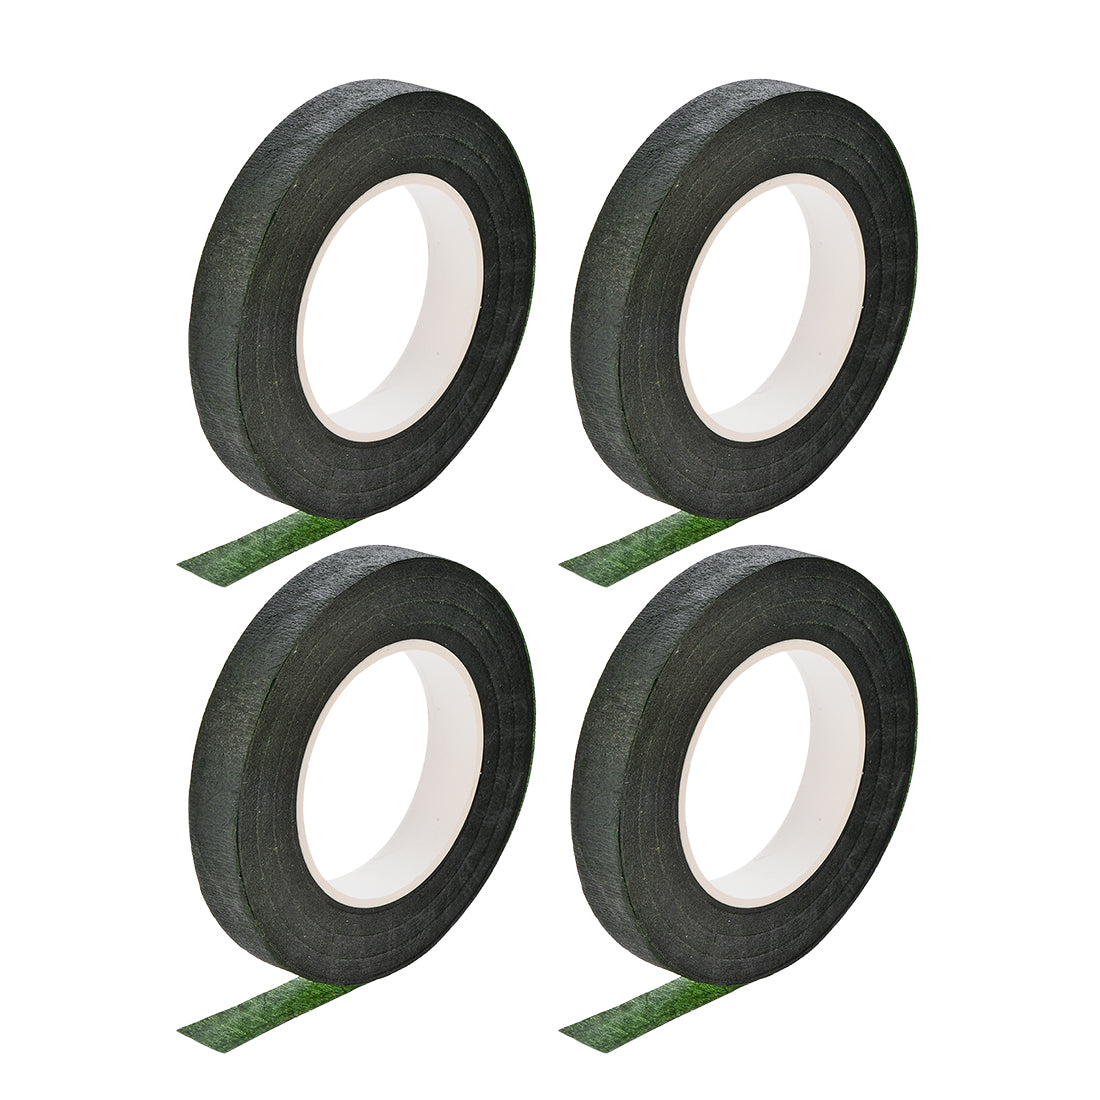 uxcell Uxcell 4Roll 1/2"x30Yard Dark Green Floral Tape Flower Adhesives Floral Arrangement